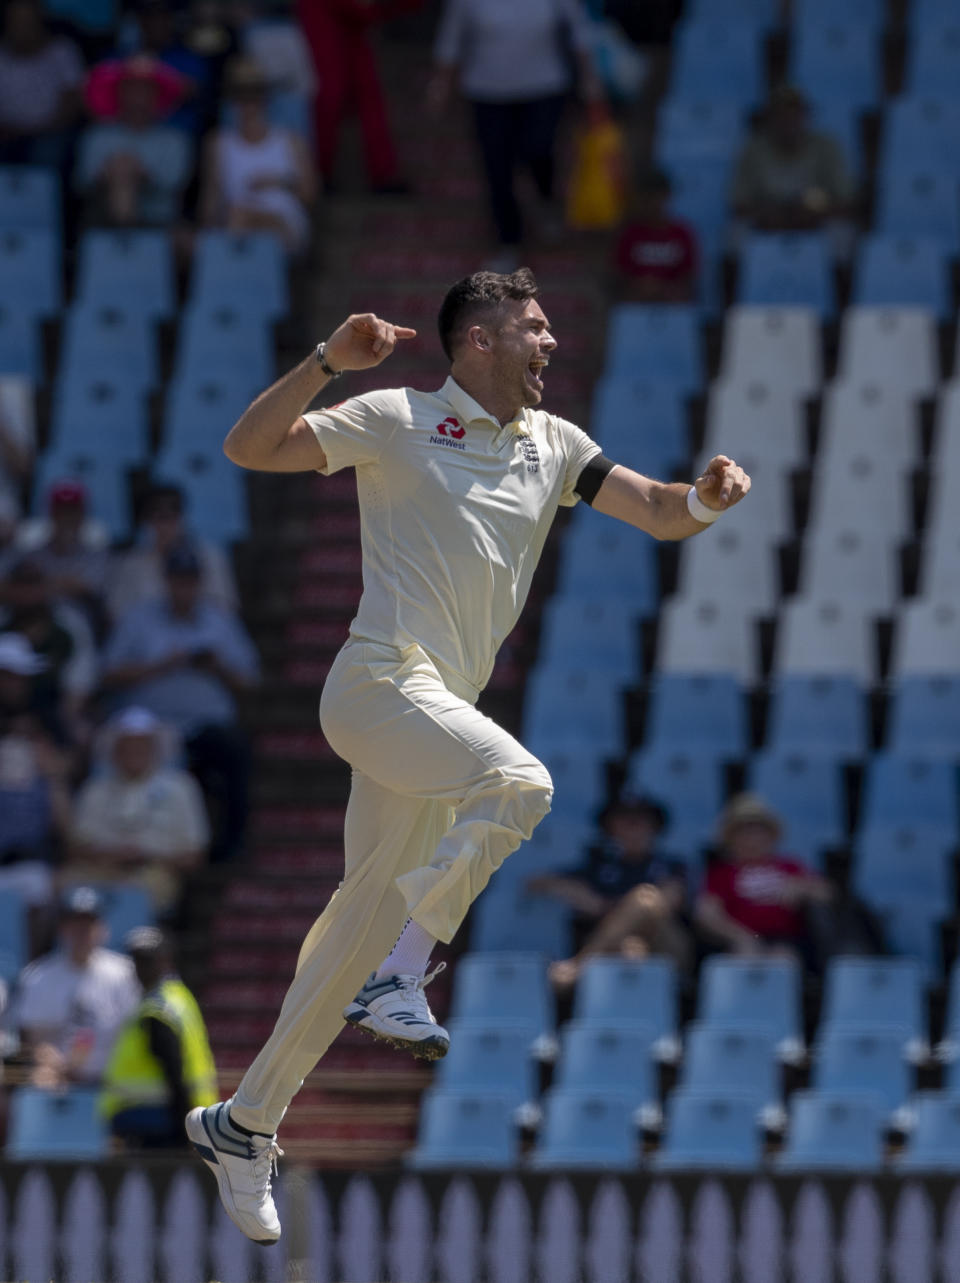 England's bowler James Anderson jumps as he celebrates after dismissing South Africa's batsman Dean Elgar for a duck on day one of the first cricket test match between South Africa and England at Centurion Park, Pretoria, South Africa, Thursday, Dec. 26, 2019. (AP Photo/Themba Hadebe)